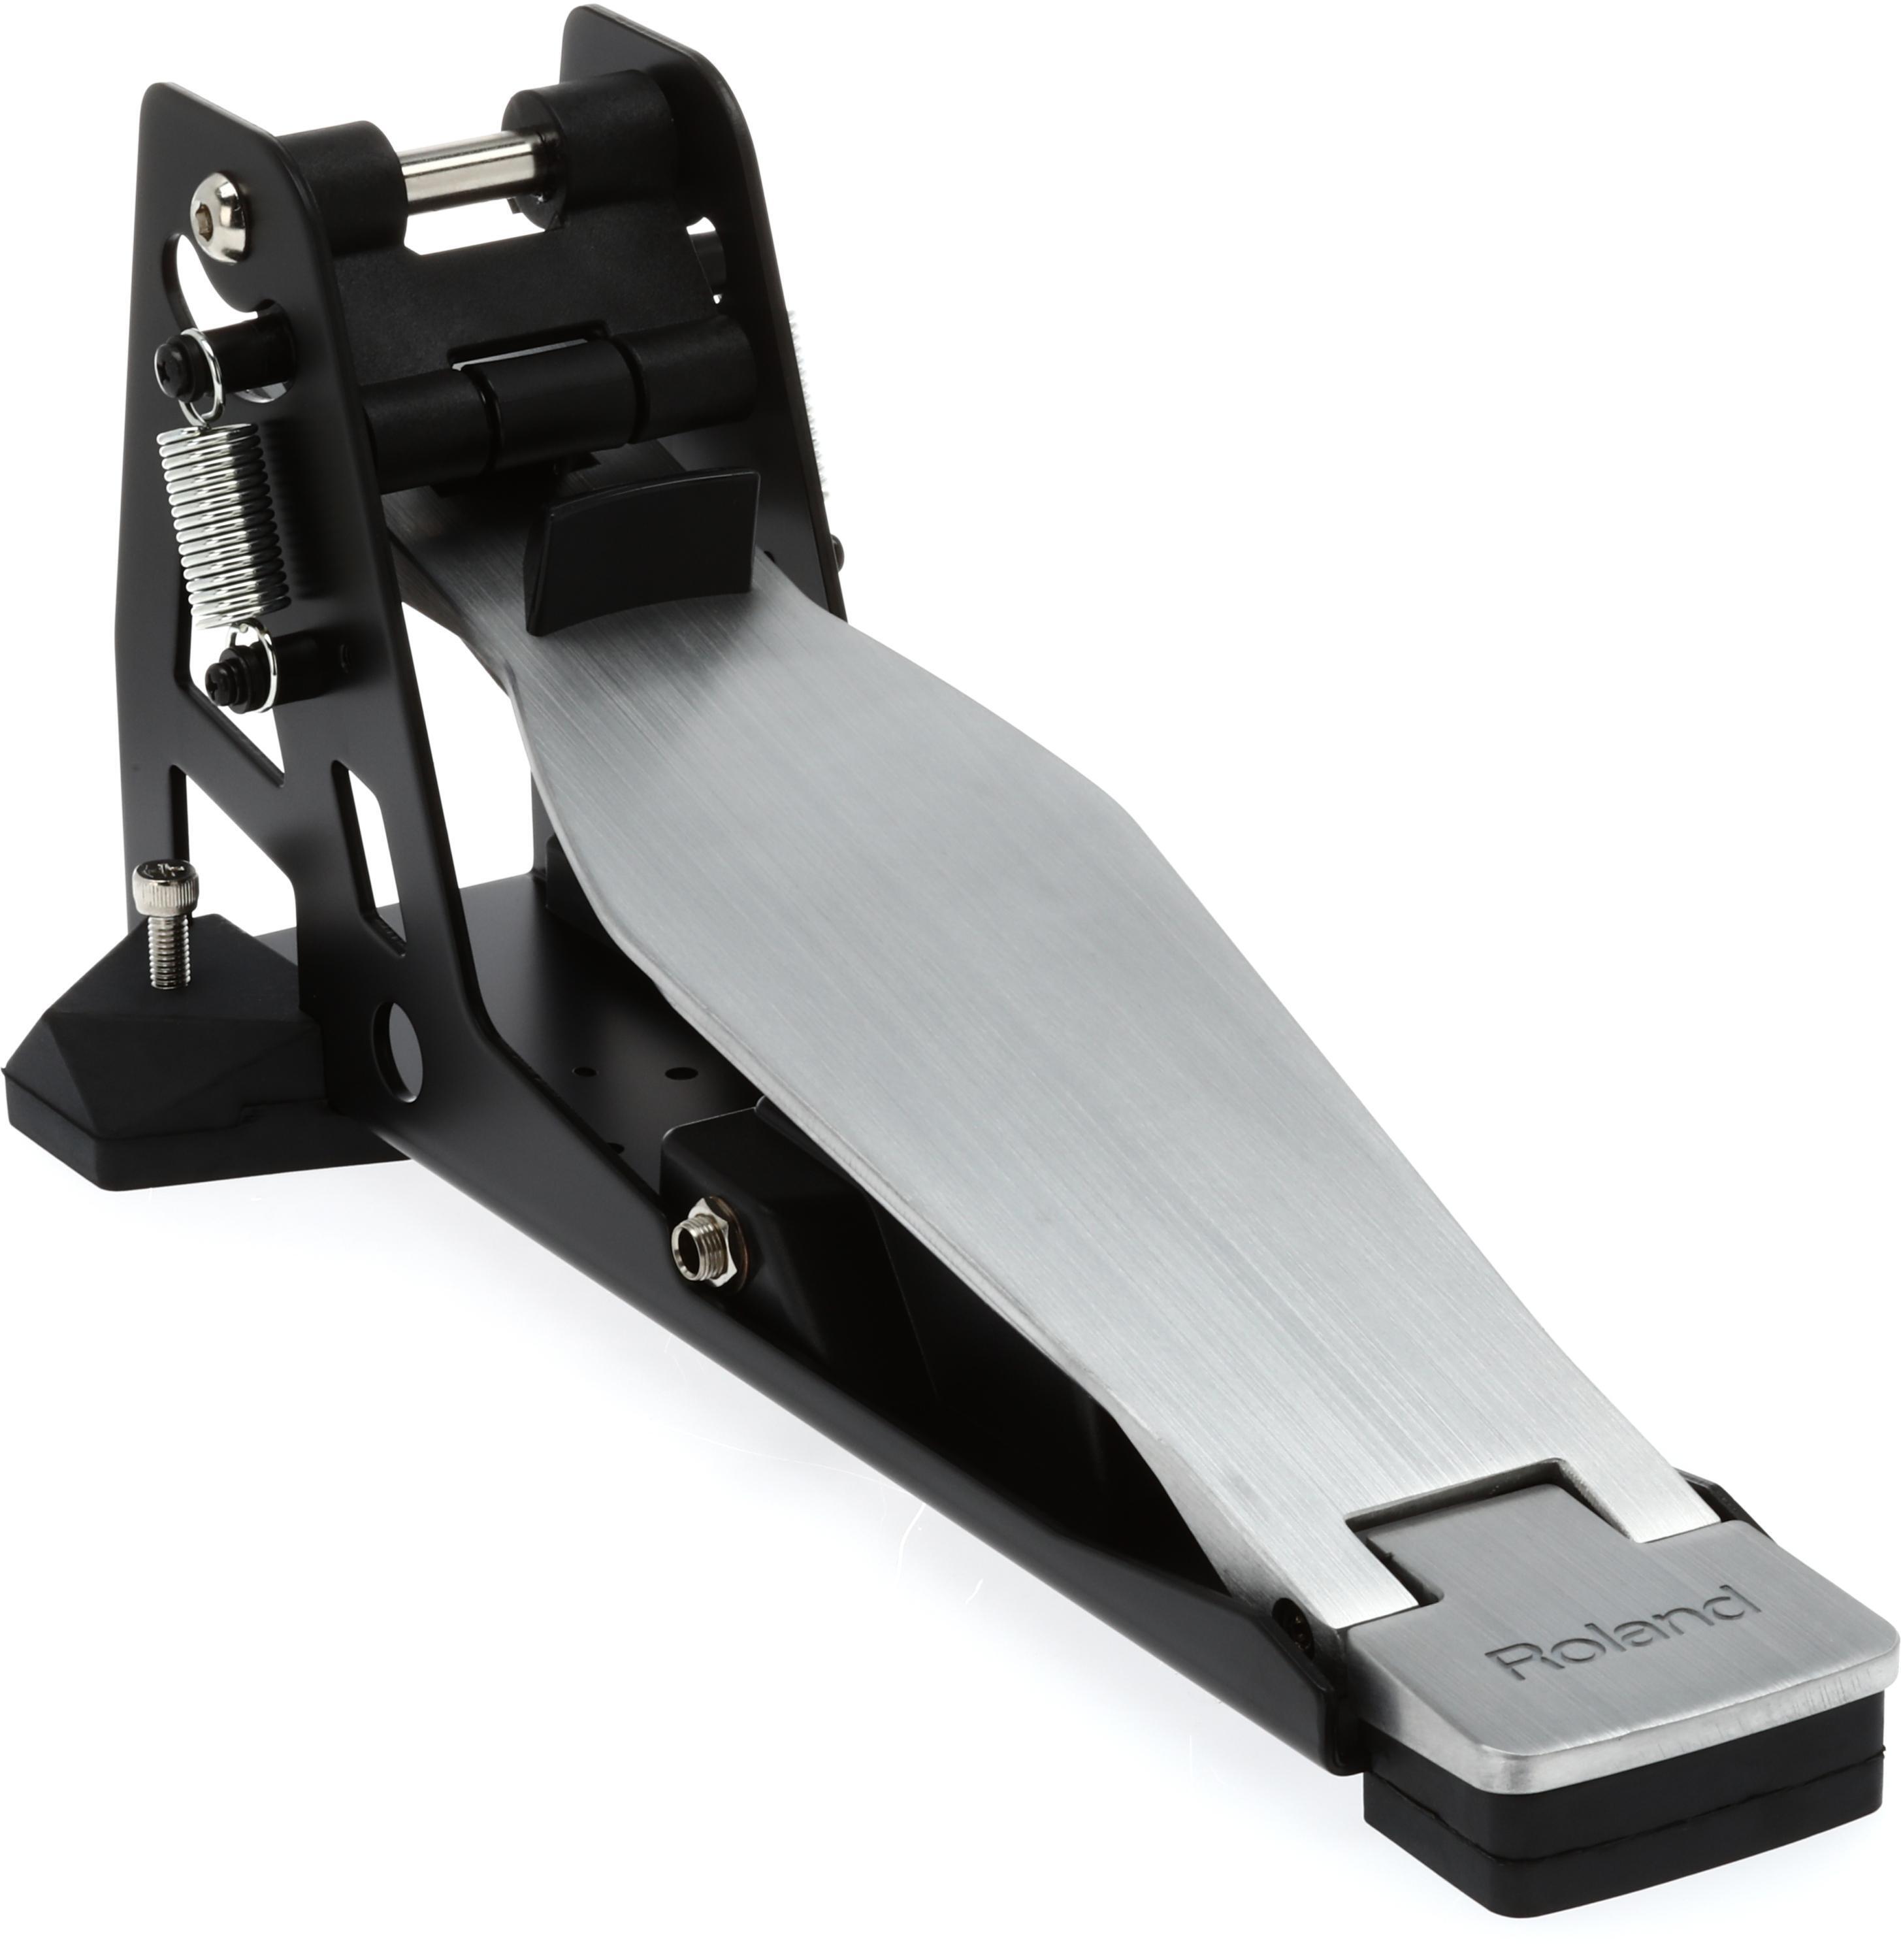 Roland KT-10 Kick Trigger Pedal | Sweetwater